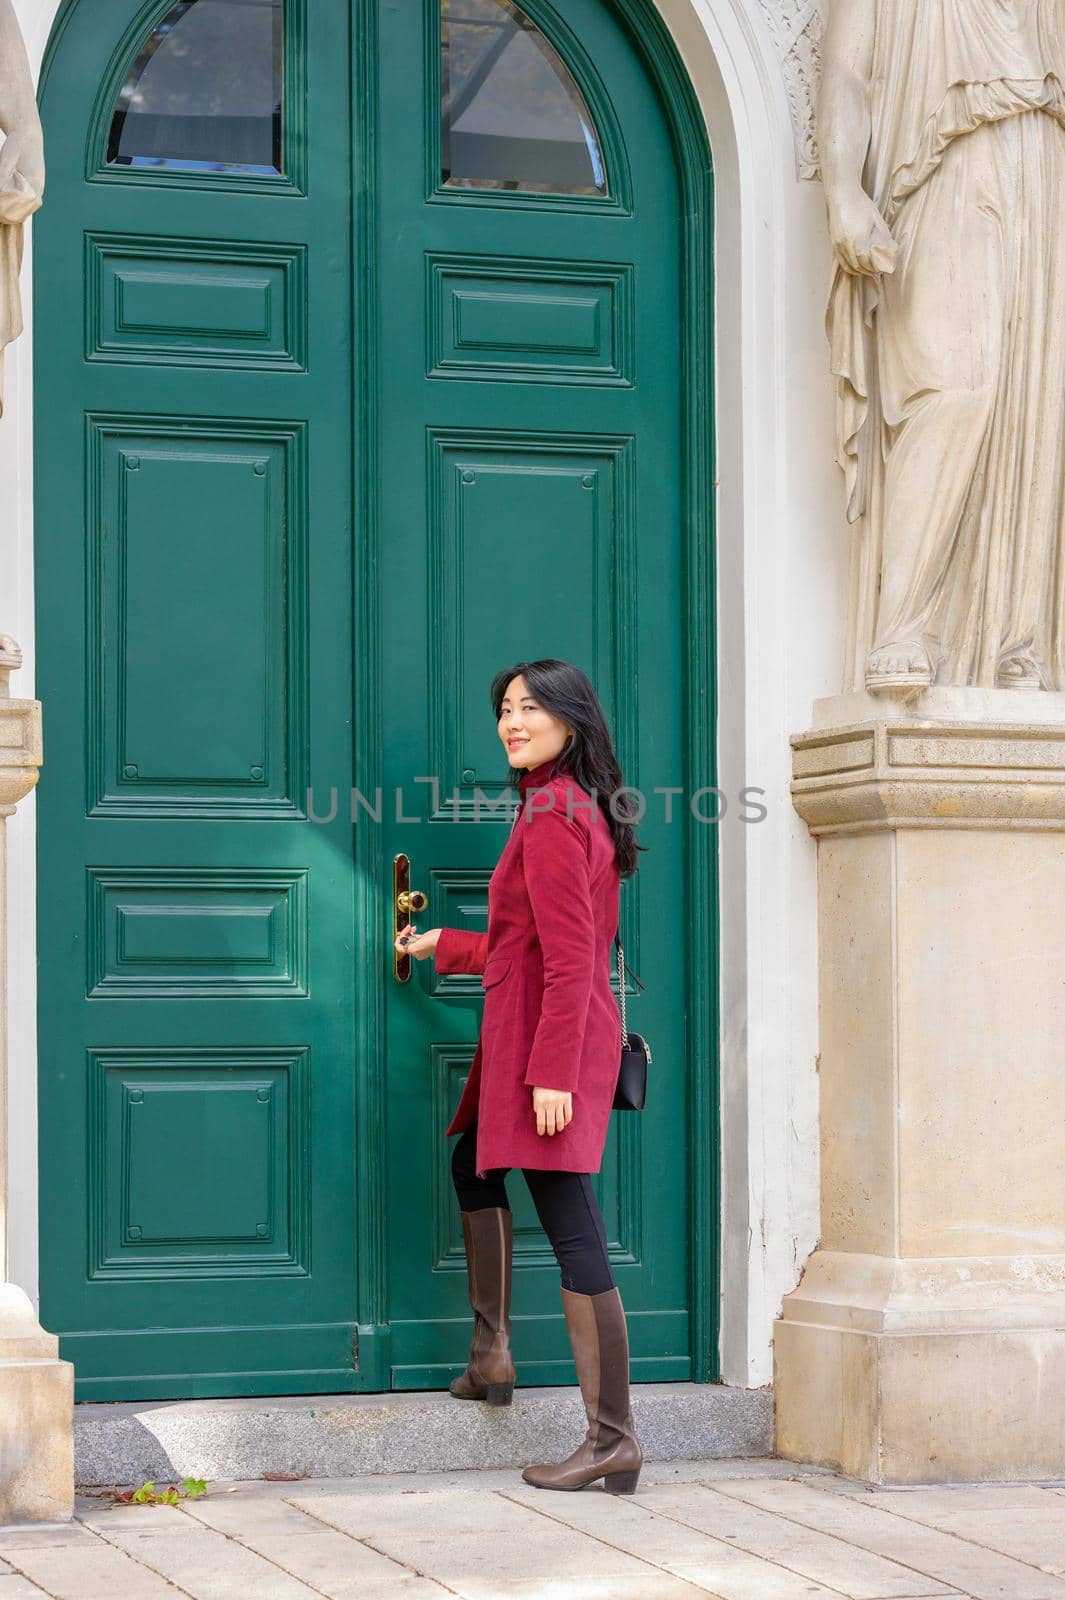 Beautiful chinese woman with long black hair on a sunny autumn day in the city.